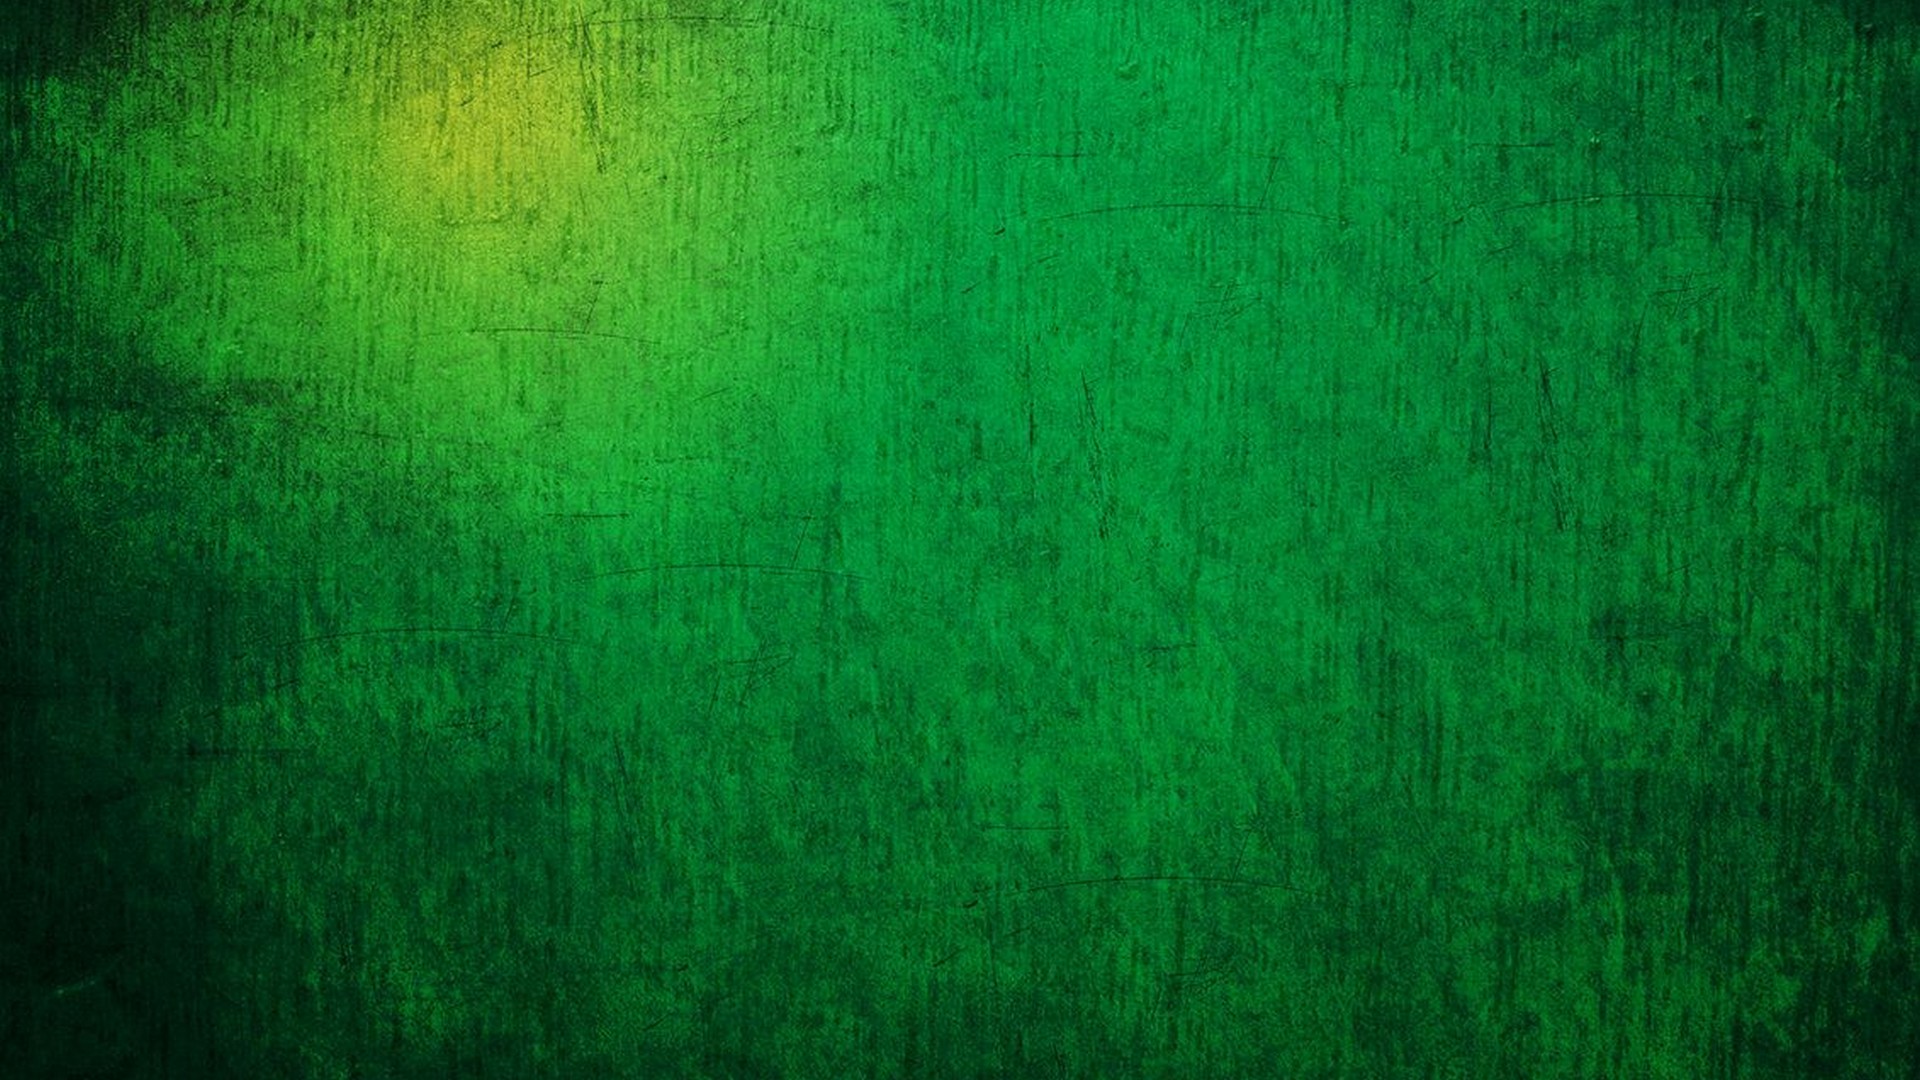 HD Dark Green Backgrounds with image resolution 1920x1080 pixel. You can use this wallpaper as background for your desktop Computer Screensavers, Android or iPhone smartphones